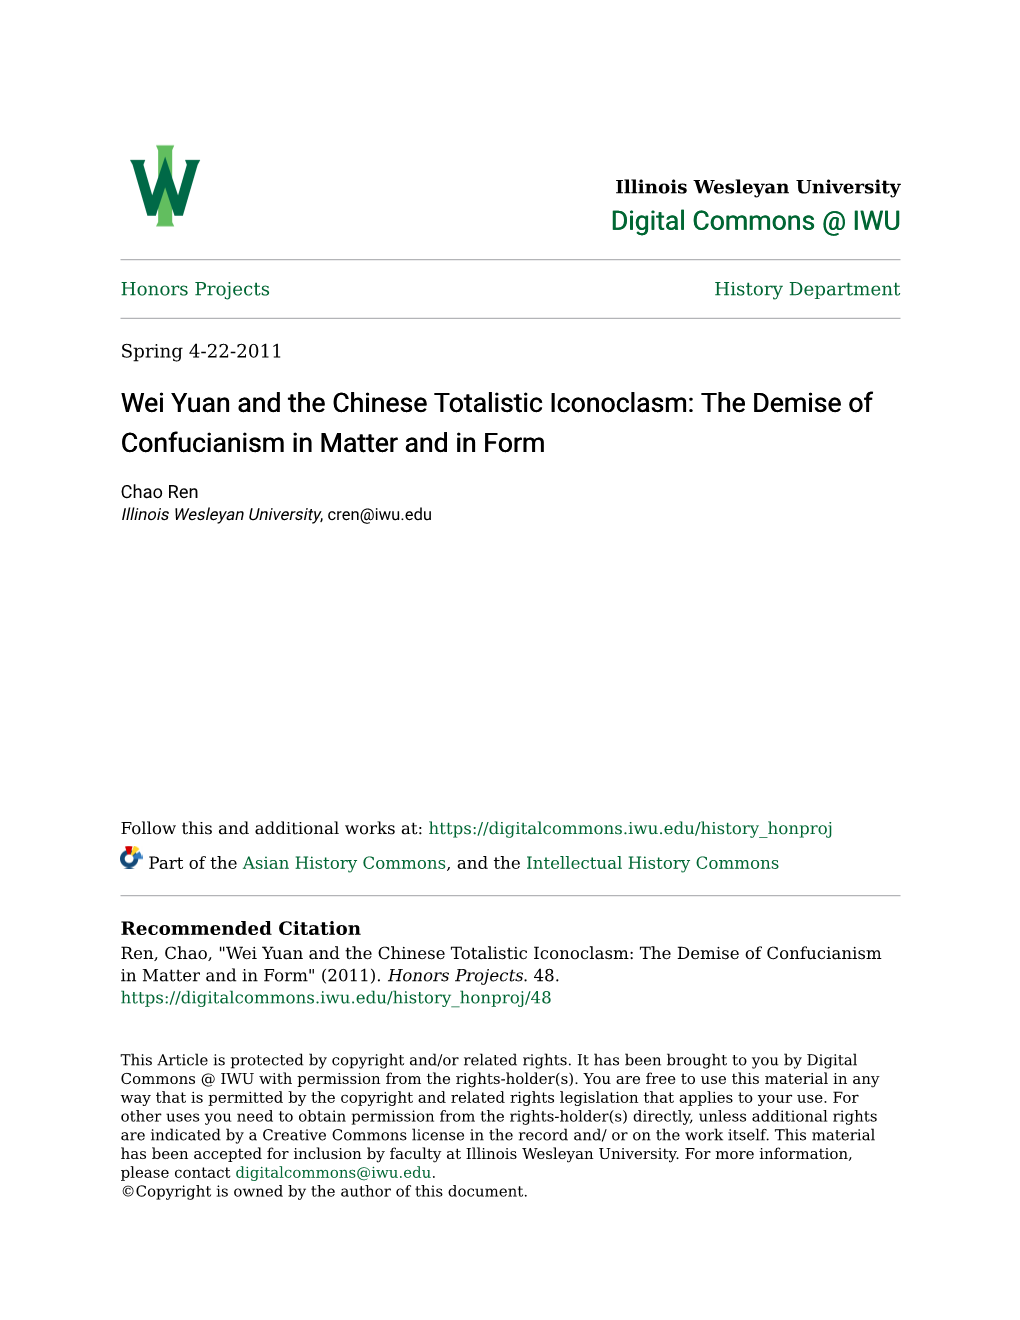 Wei Yuan and the Chinese Totalistic Iconoclasm: the Demise of Confucianism in Matter and in Form